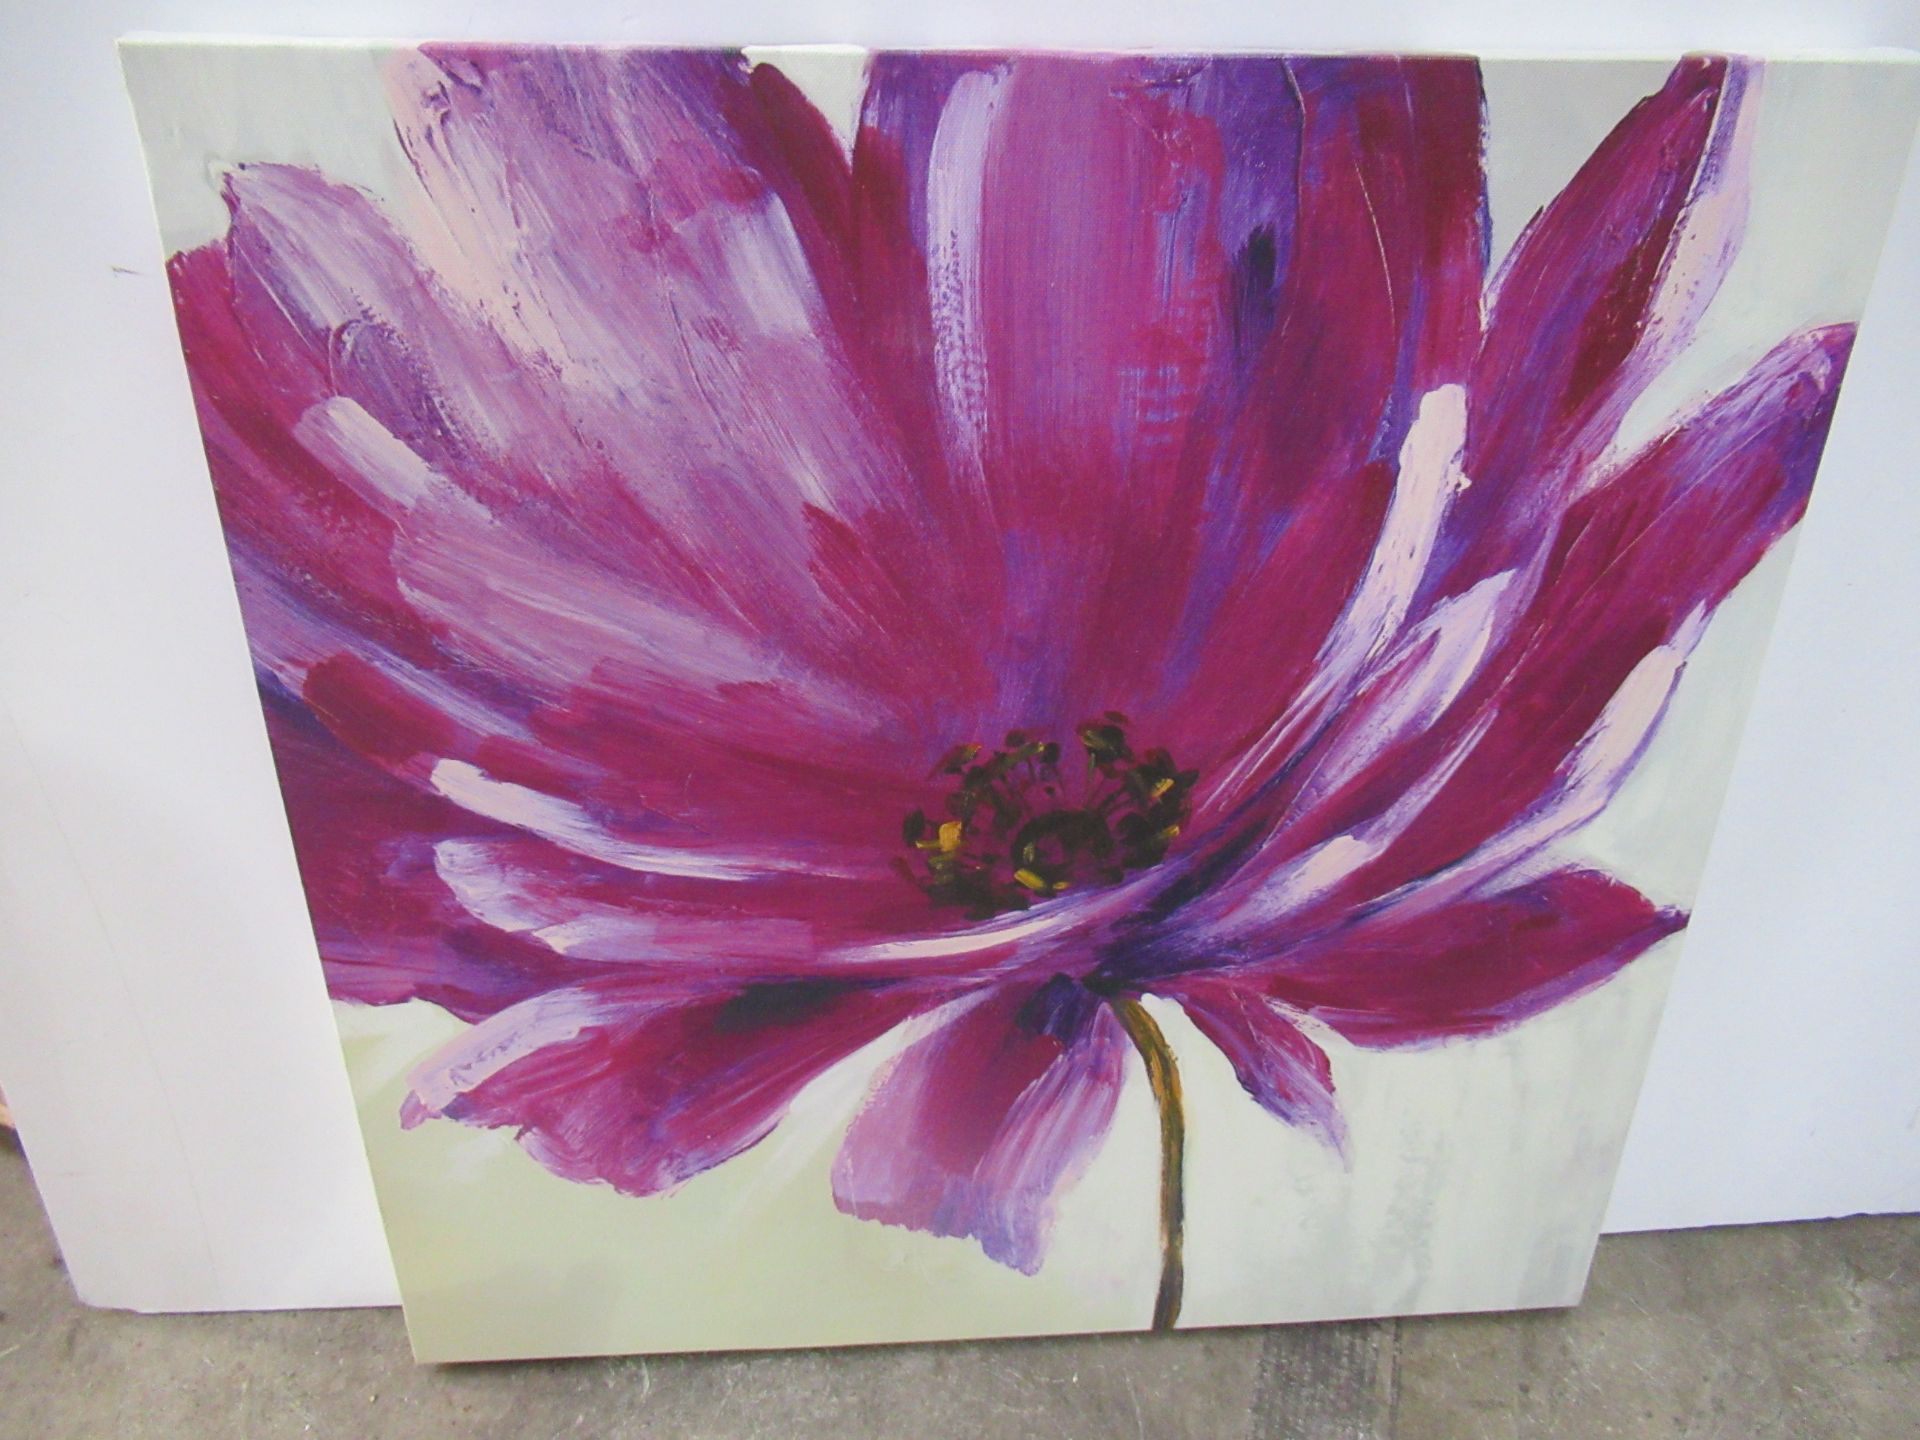 Pair of Floral Canvas Prints (500mm x 500mm) - Image 2 of 2